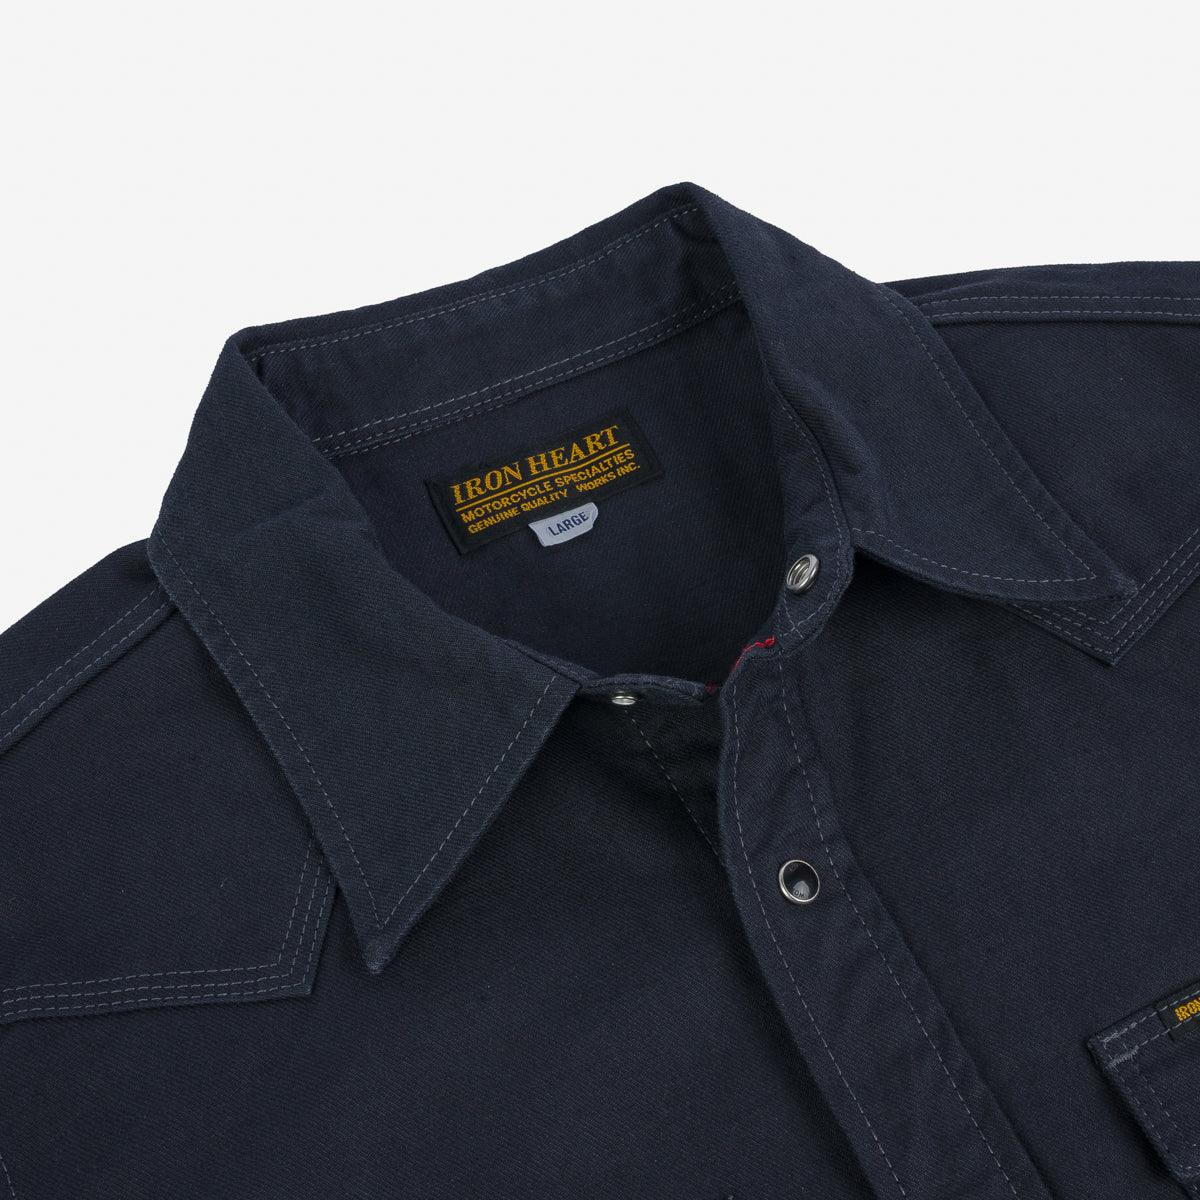 Image showing the IHSH-381-BLK - 9oz Military Serge CPO Shirt - Black which is a Shirts described by the following info SS24 and sold on the IRON HEART GERMANY online store